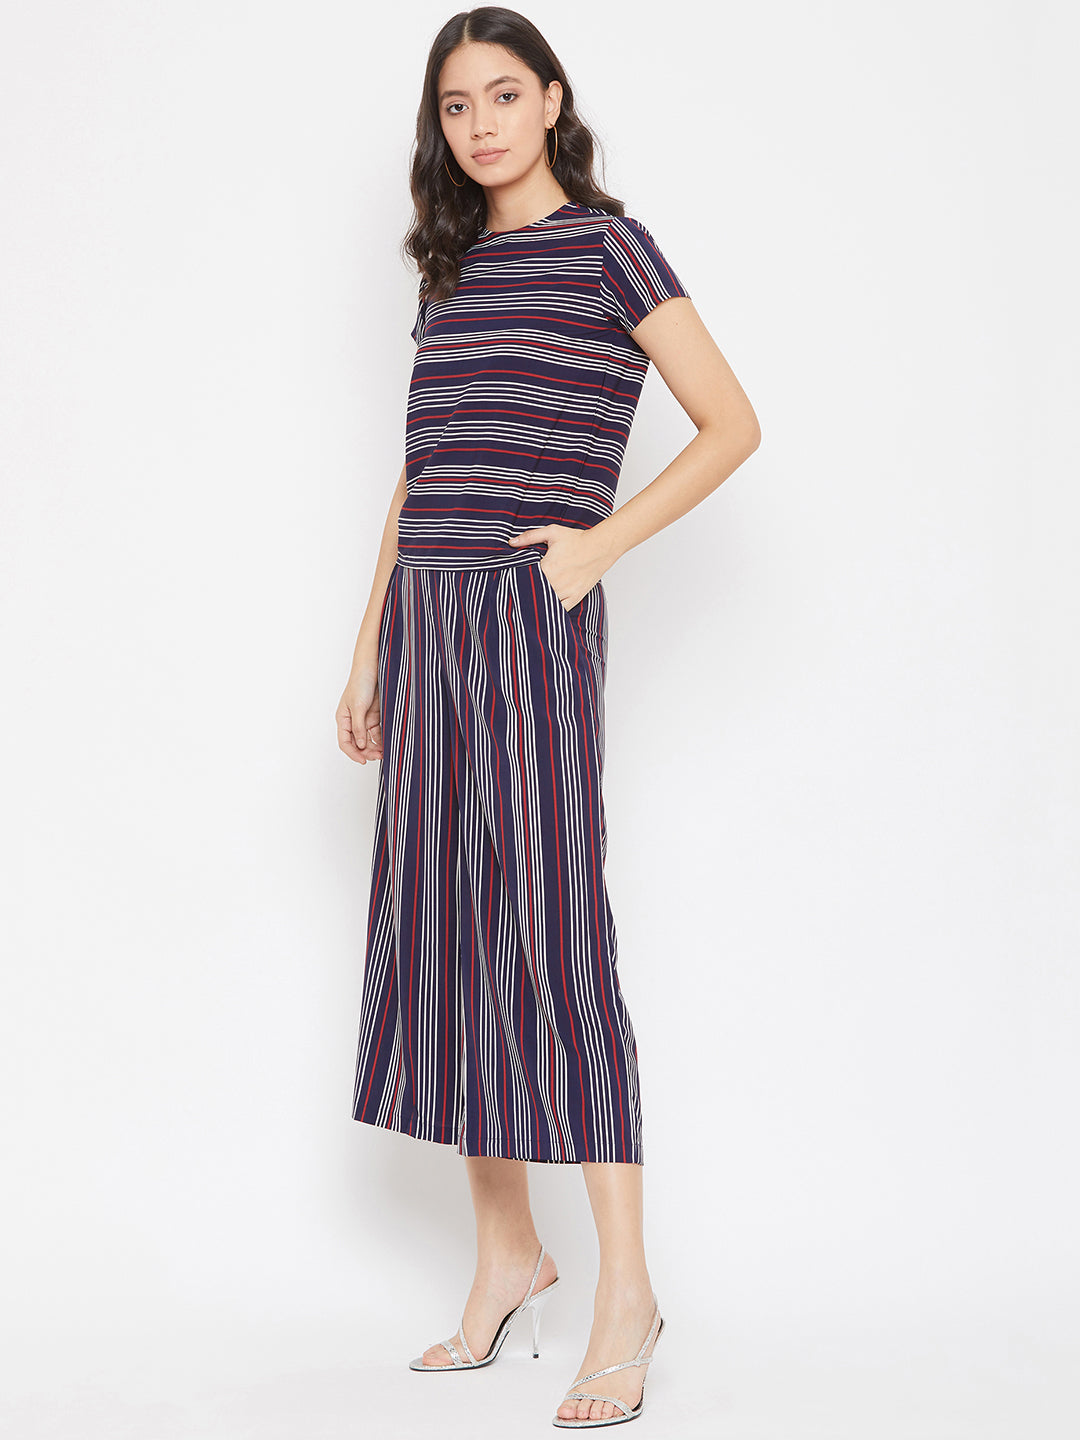 Striped Co-ord Set - Women Co-ord Sets